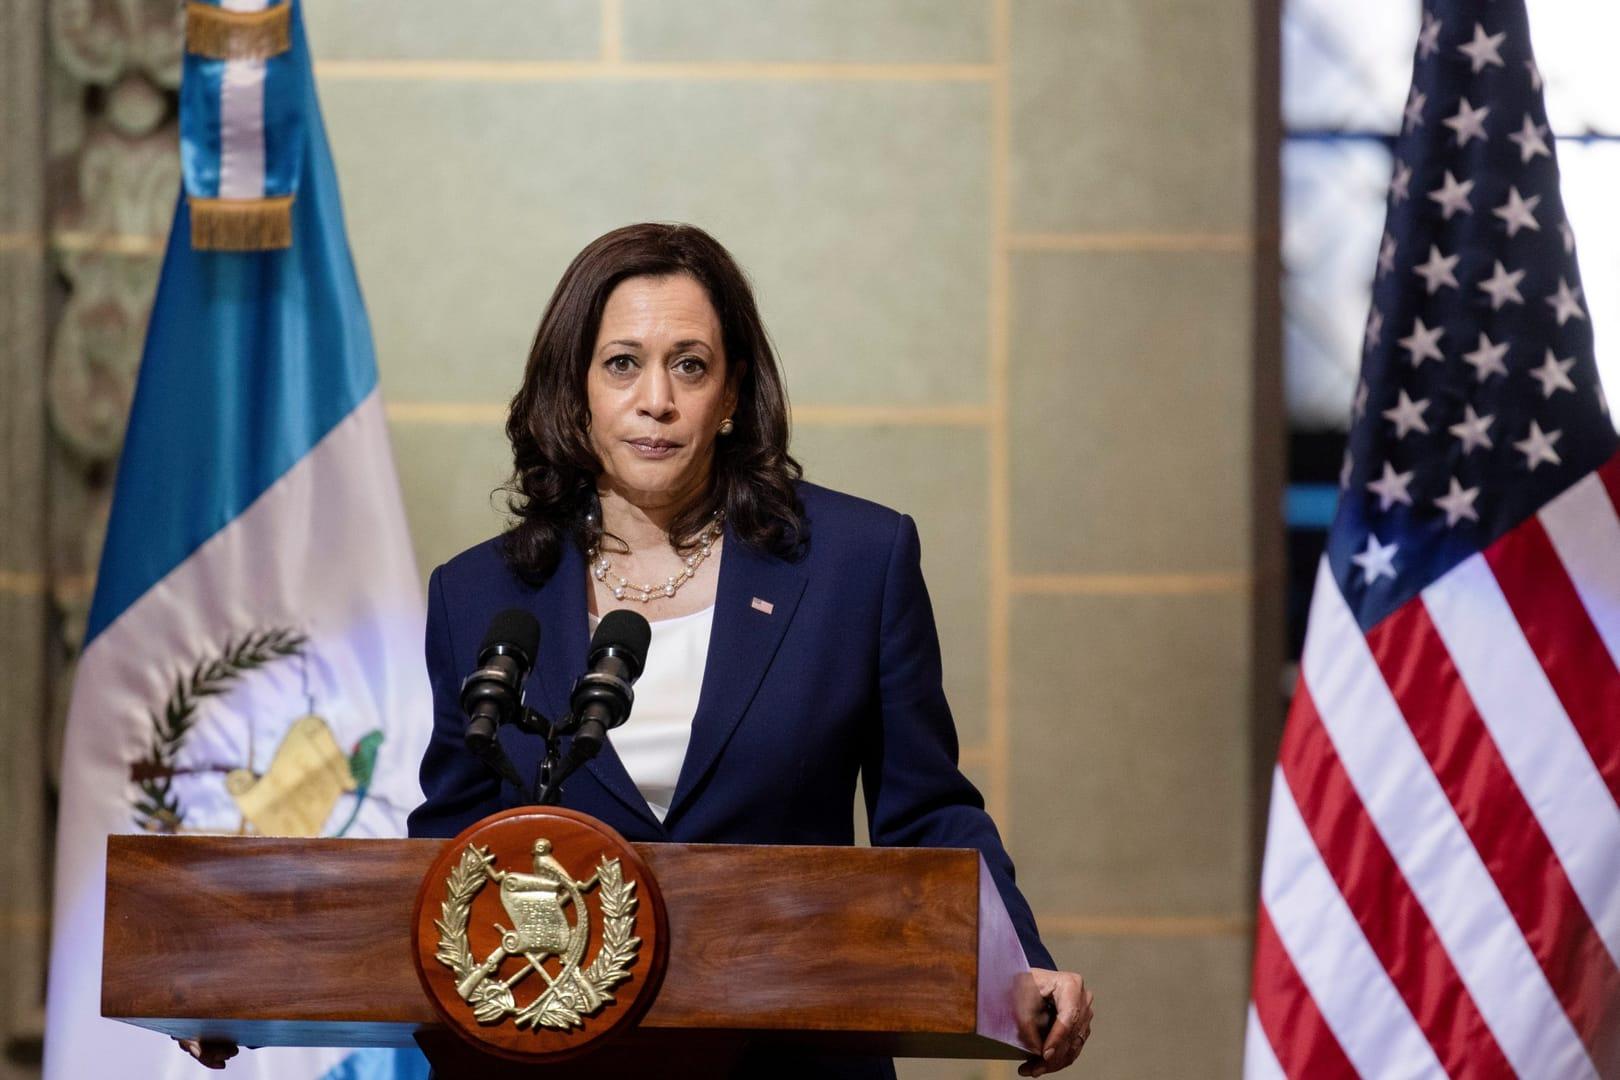 Harris’ Central America agenda features longtime concerns for the church